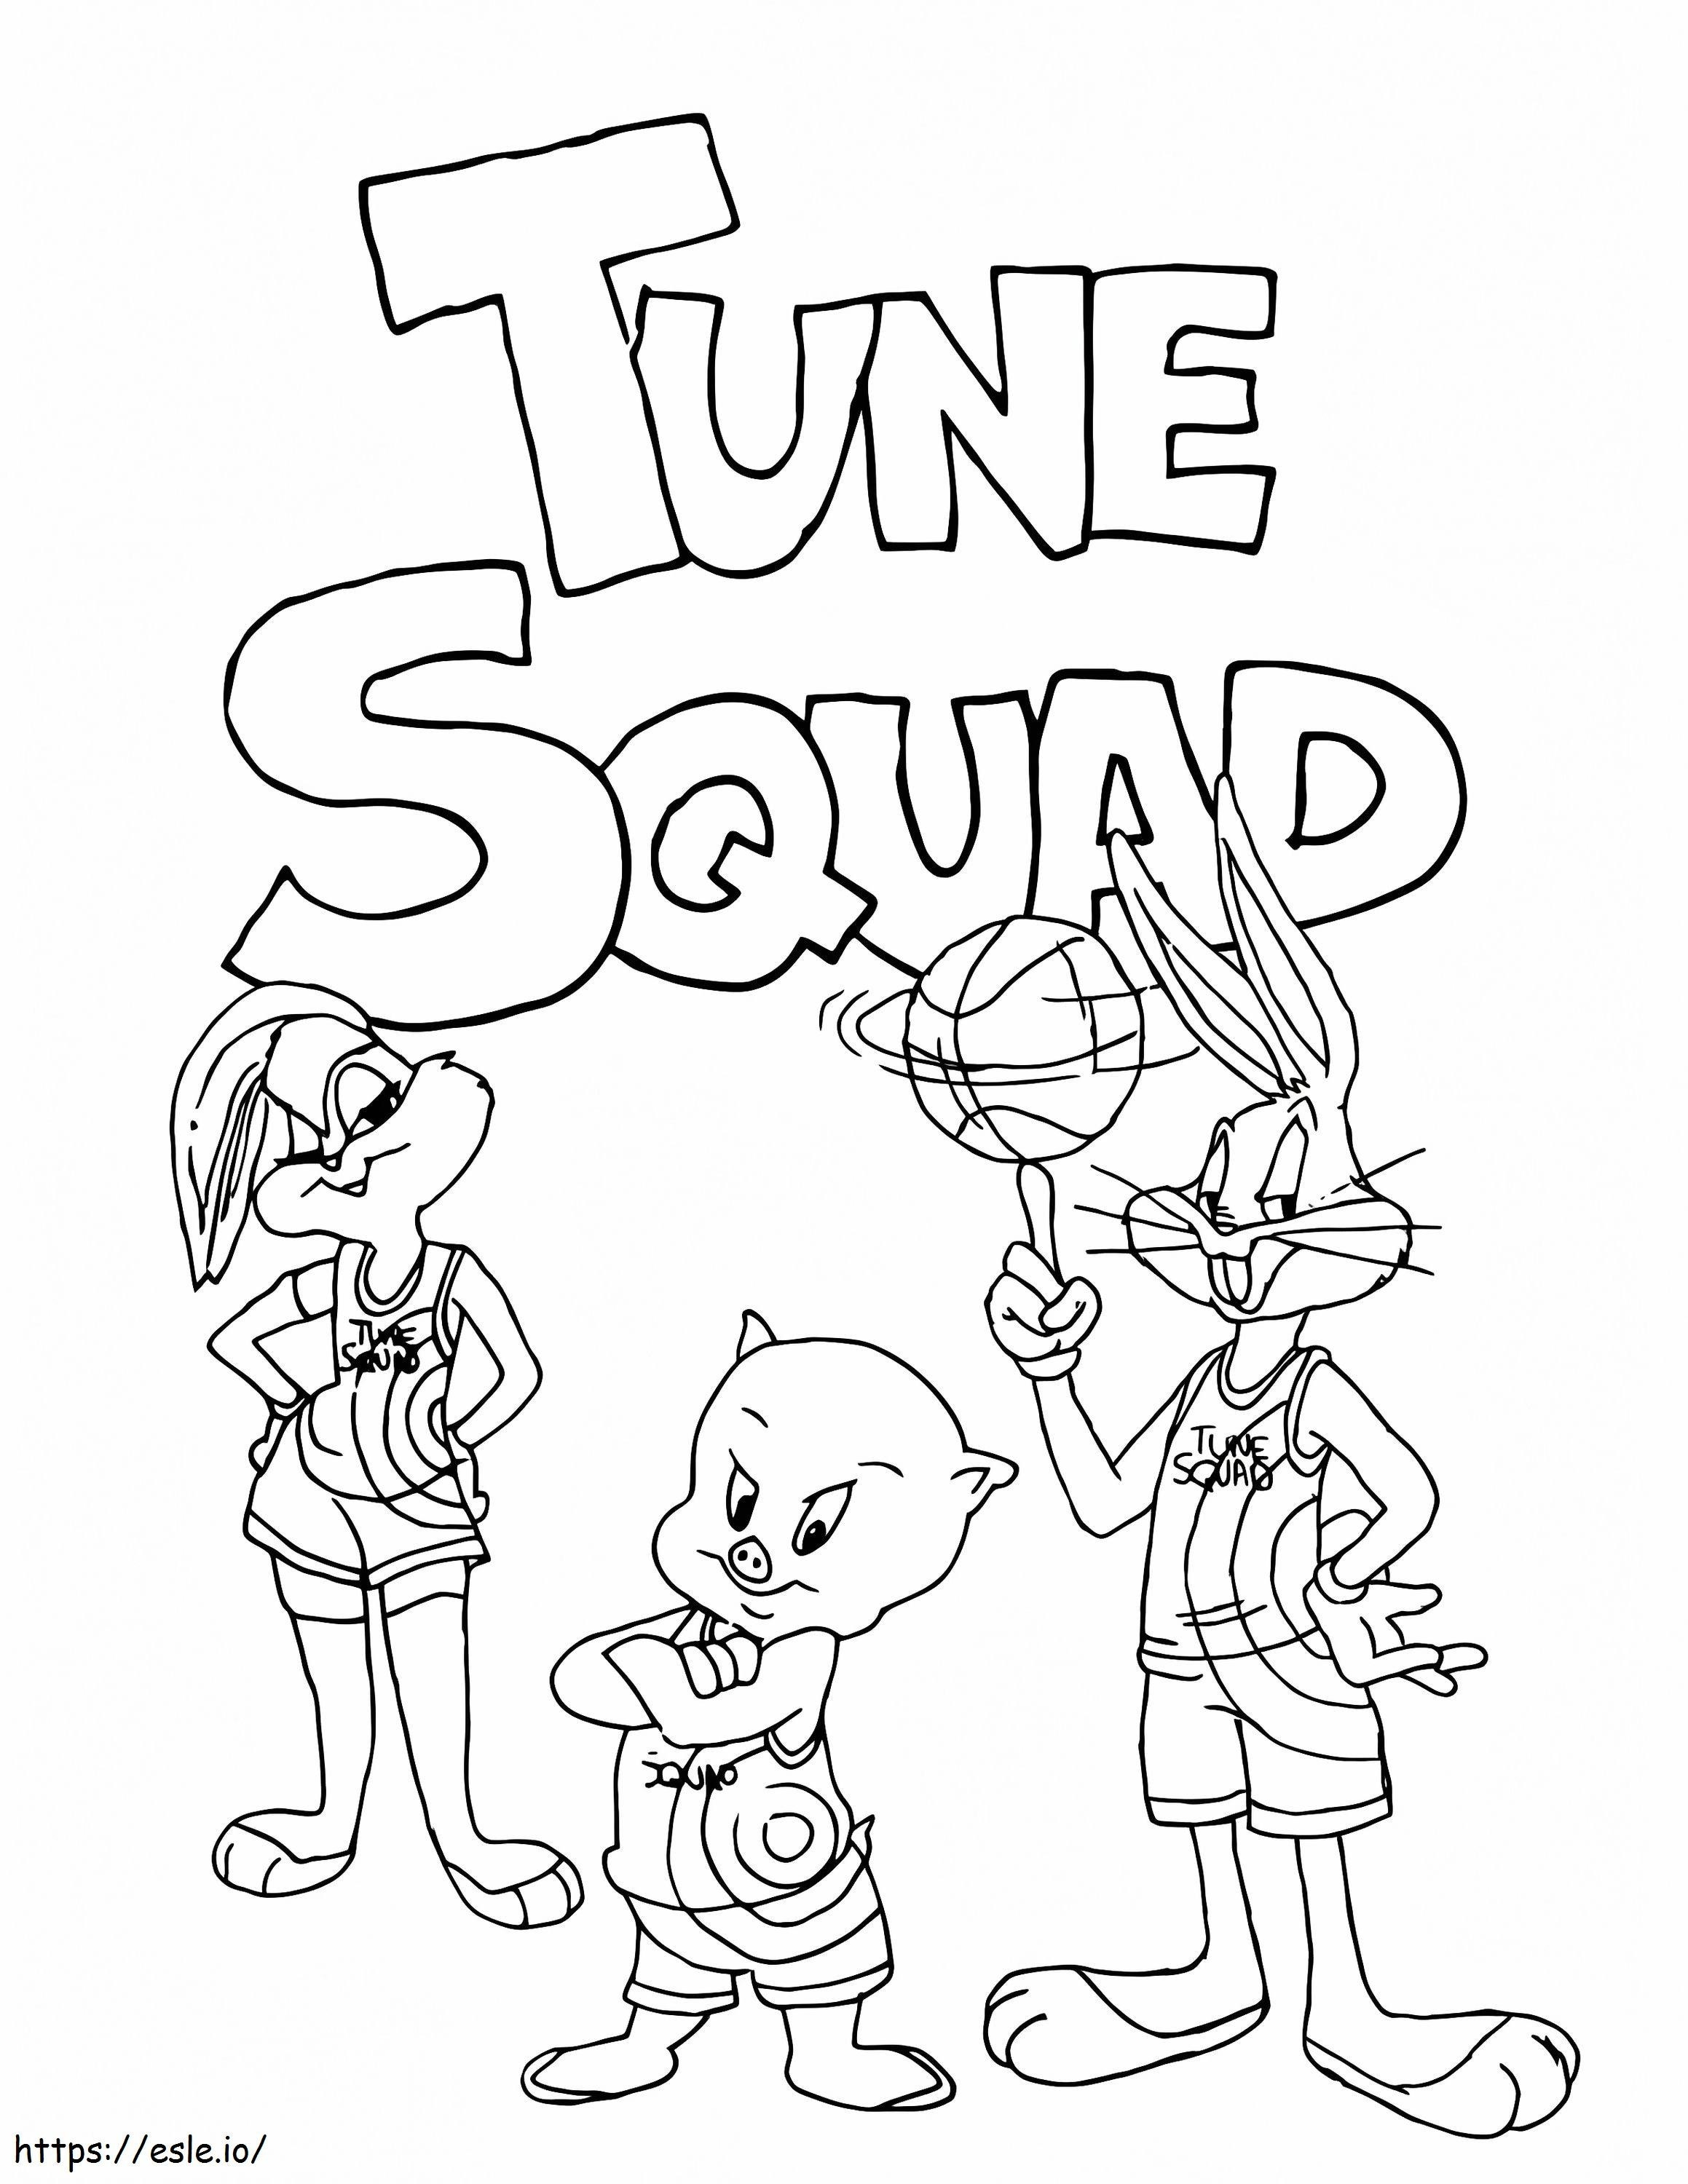 Tune Squad Space Jam coloring page